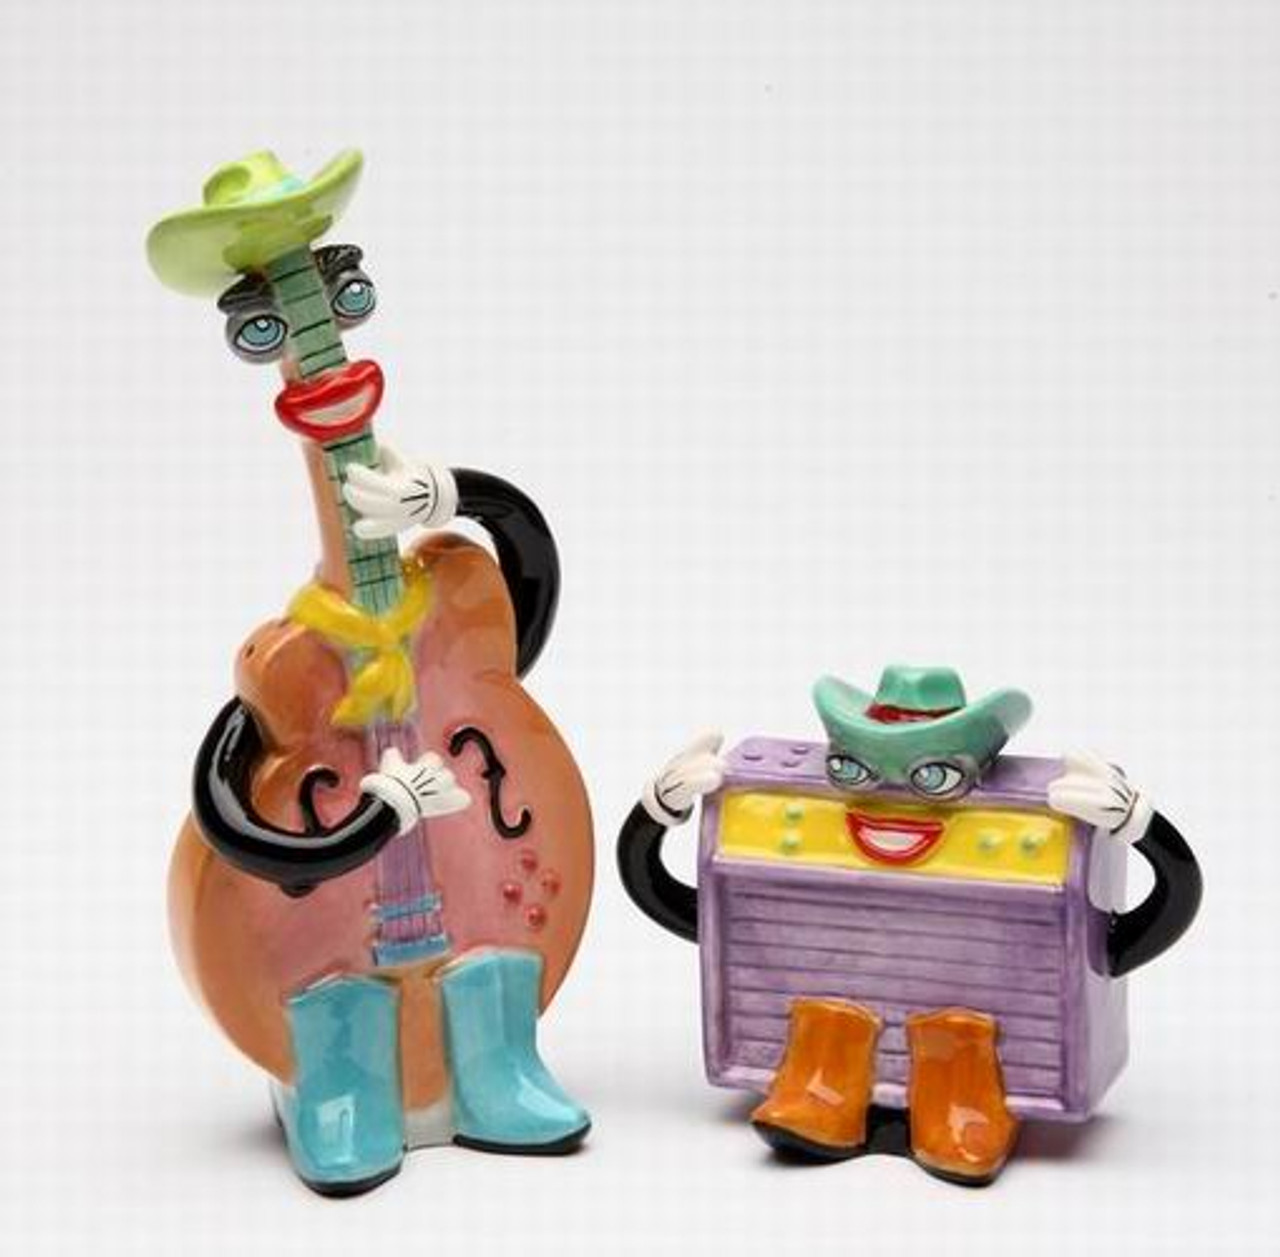 https://cdn11.bigcommerce.com/s-oo0gdojvjo/images/stencil/1280x1280/products/4095/6117/62227-country-electronic-guitar-and-amp-salt-and-pepper-shakers-set-of-4__52526.1536906714.jpg?c=2